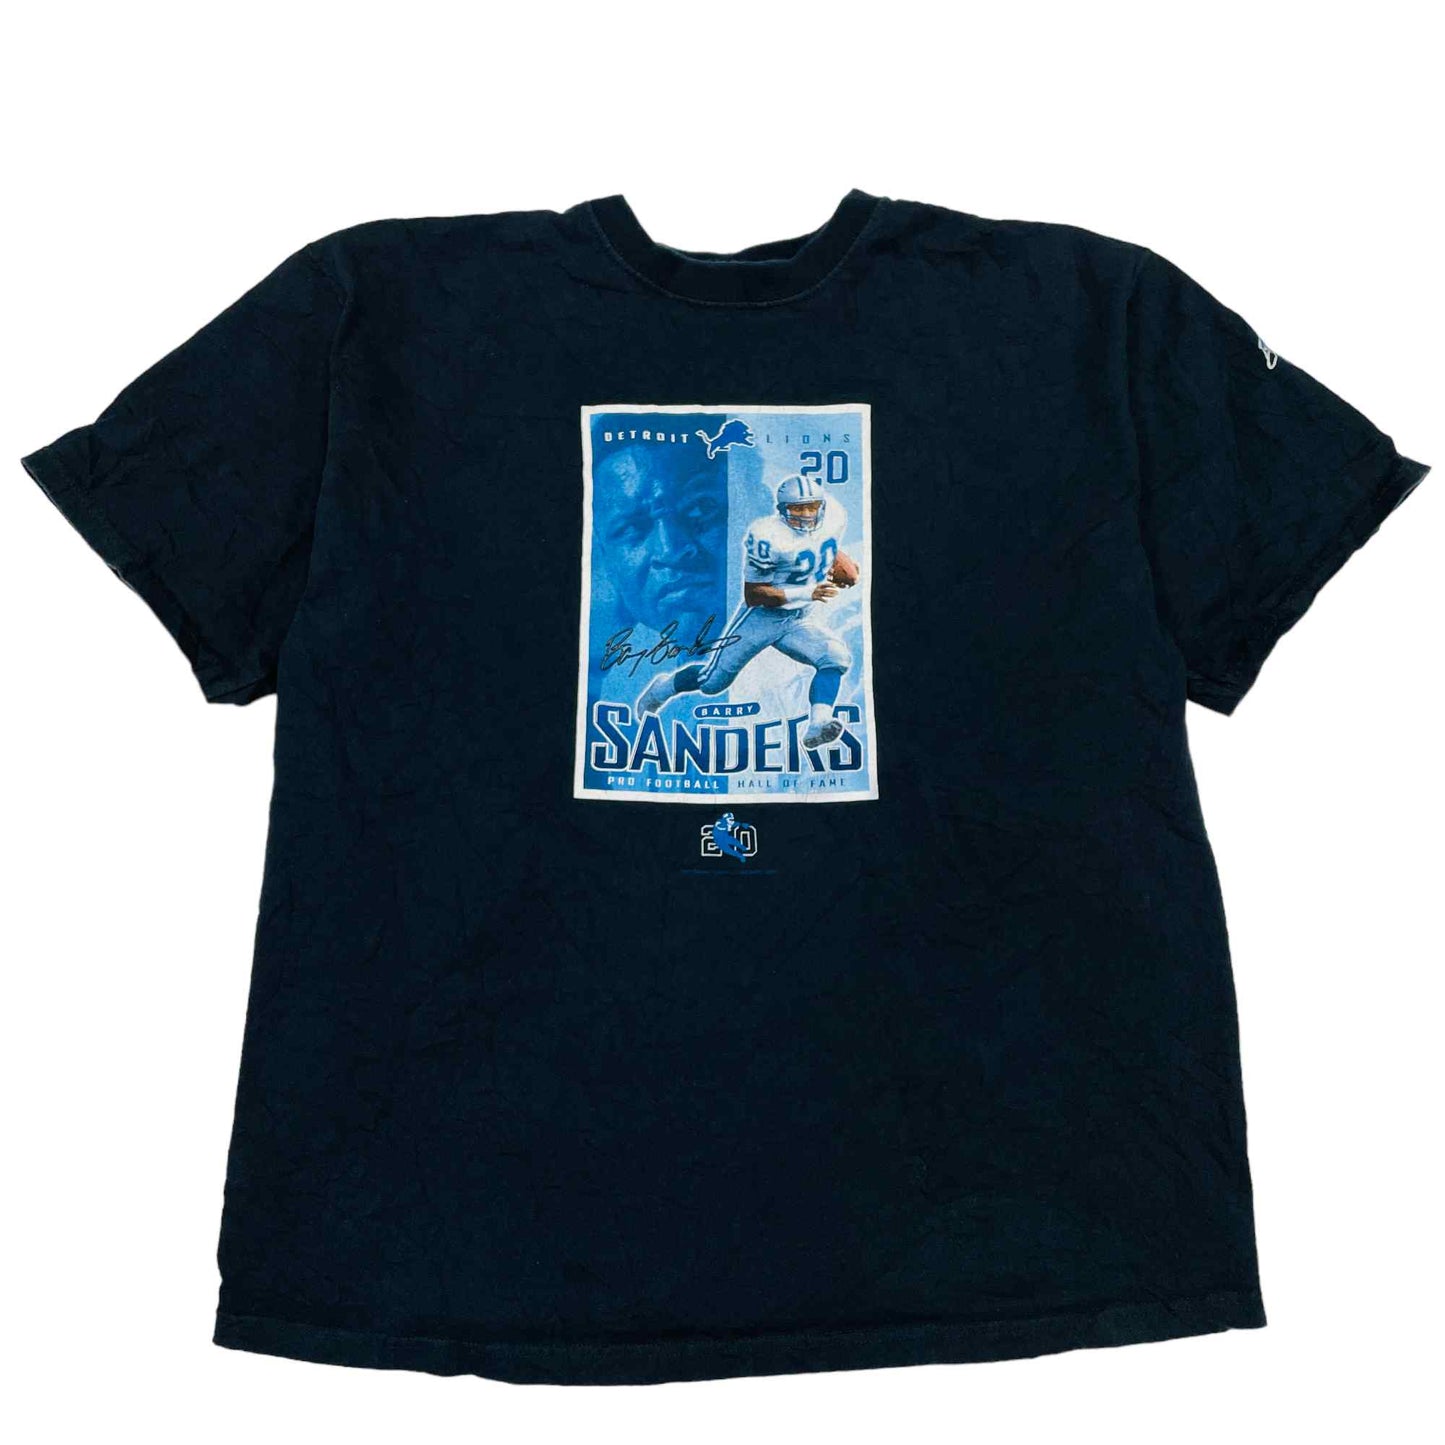 Barry Sanders Hall of Fame Reebok T-Shirt - XL – The Vintage Store